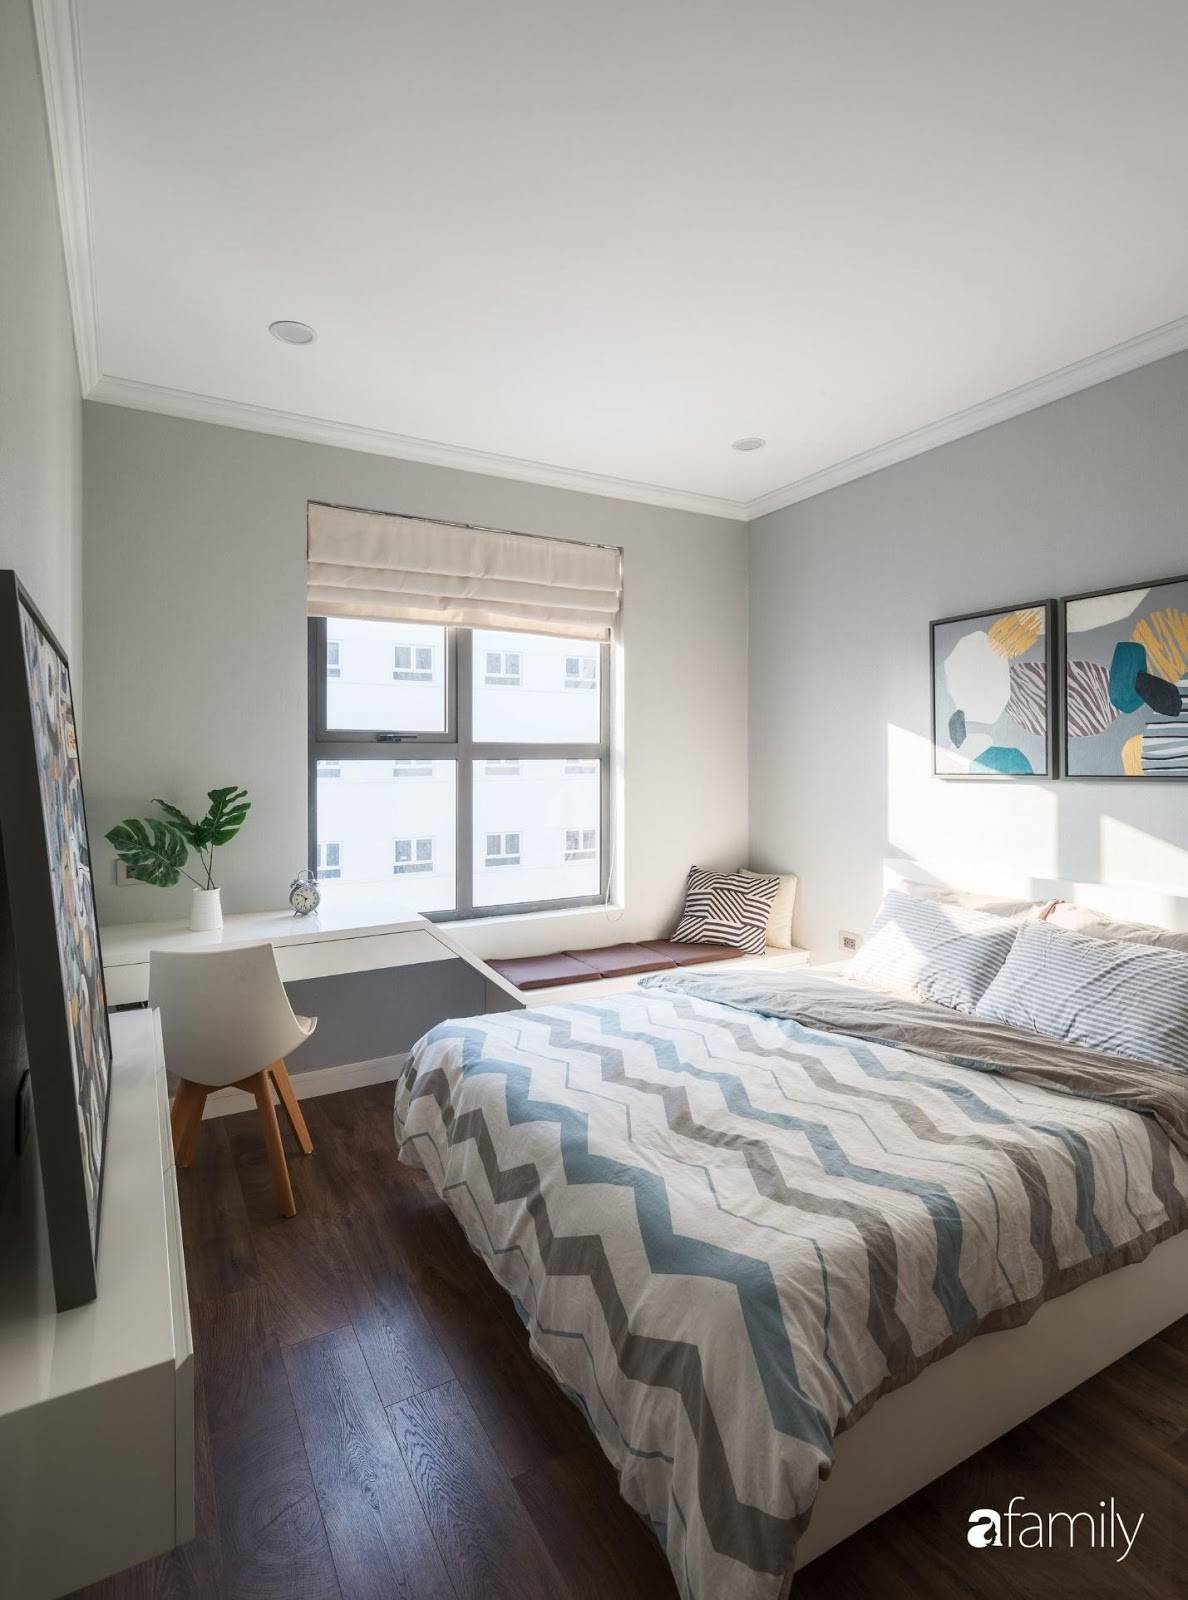 Another bedroom with a cool pastel tone. Natural light fills the room through large glass windows.